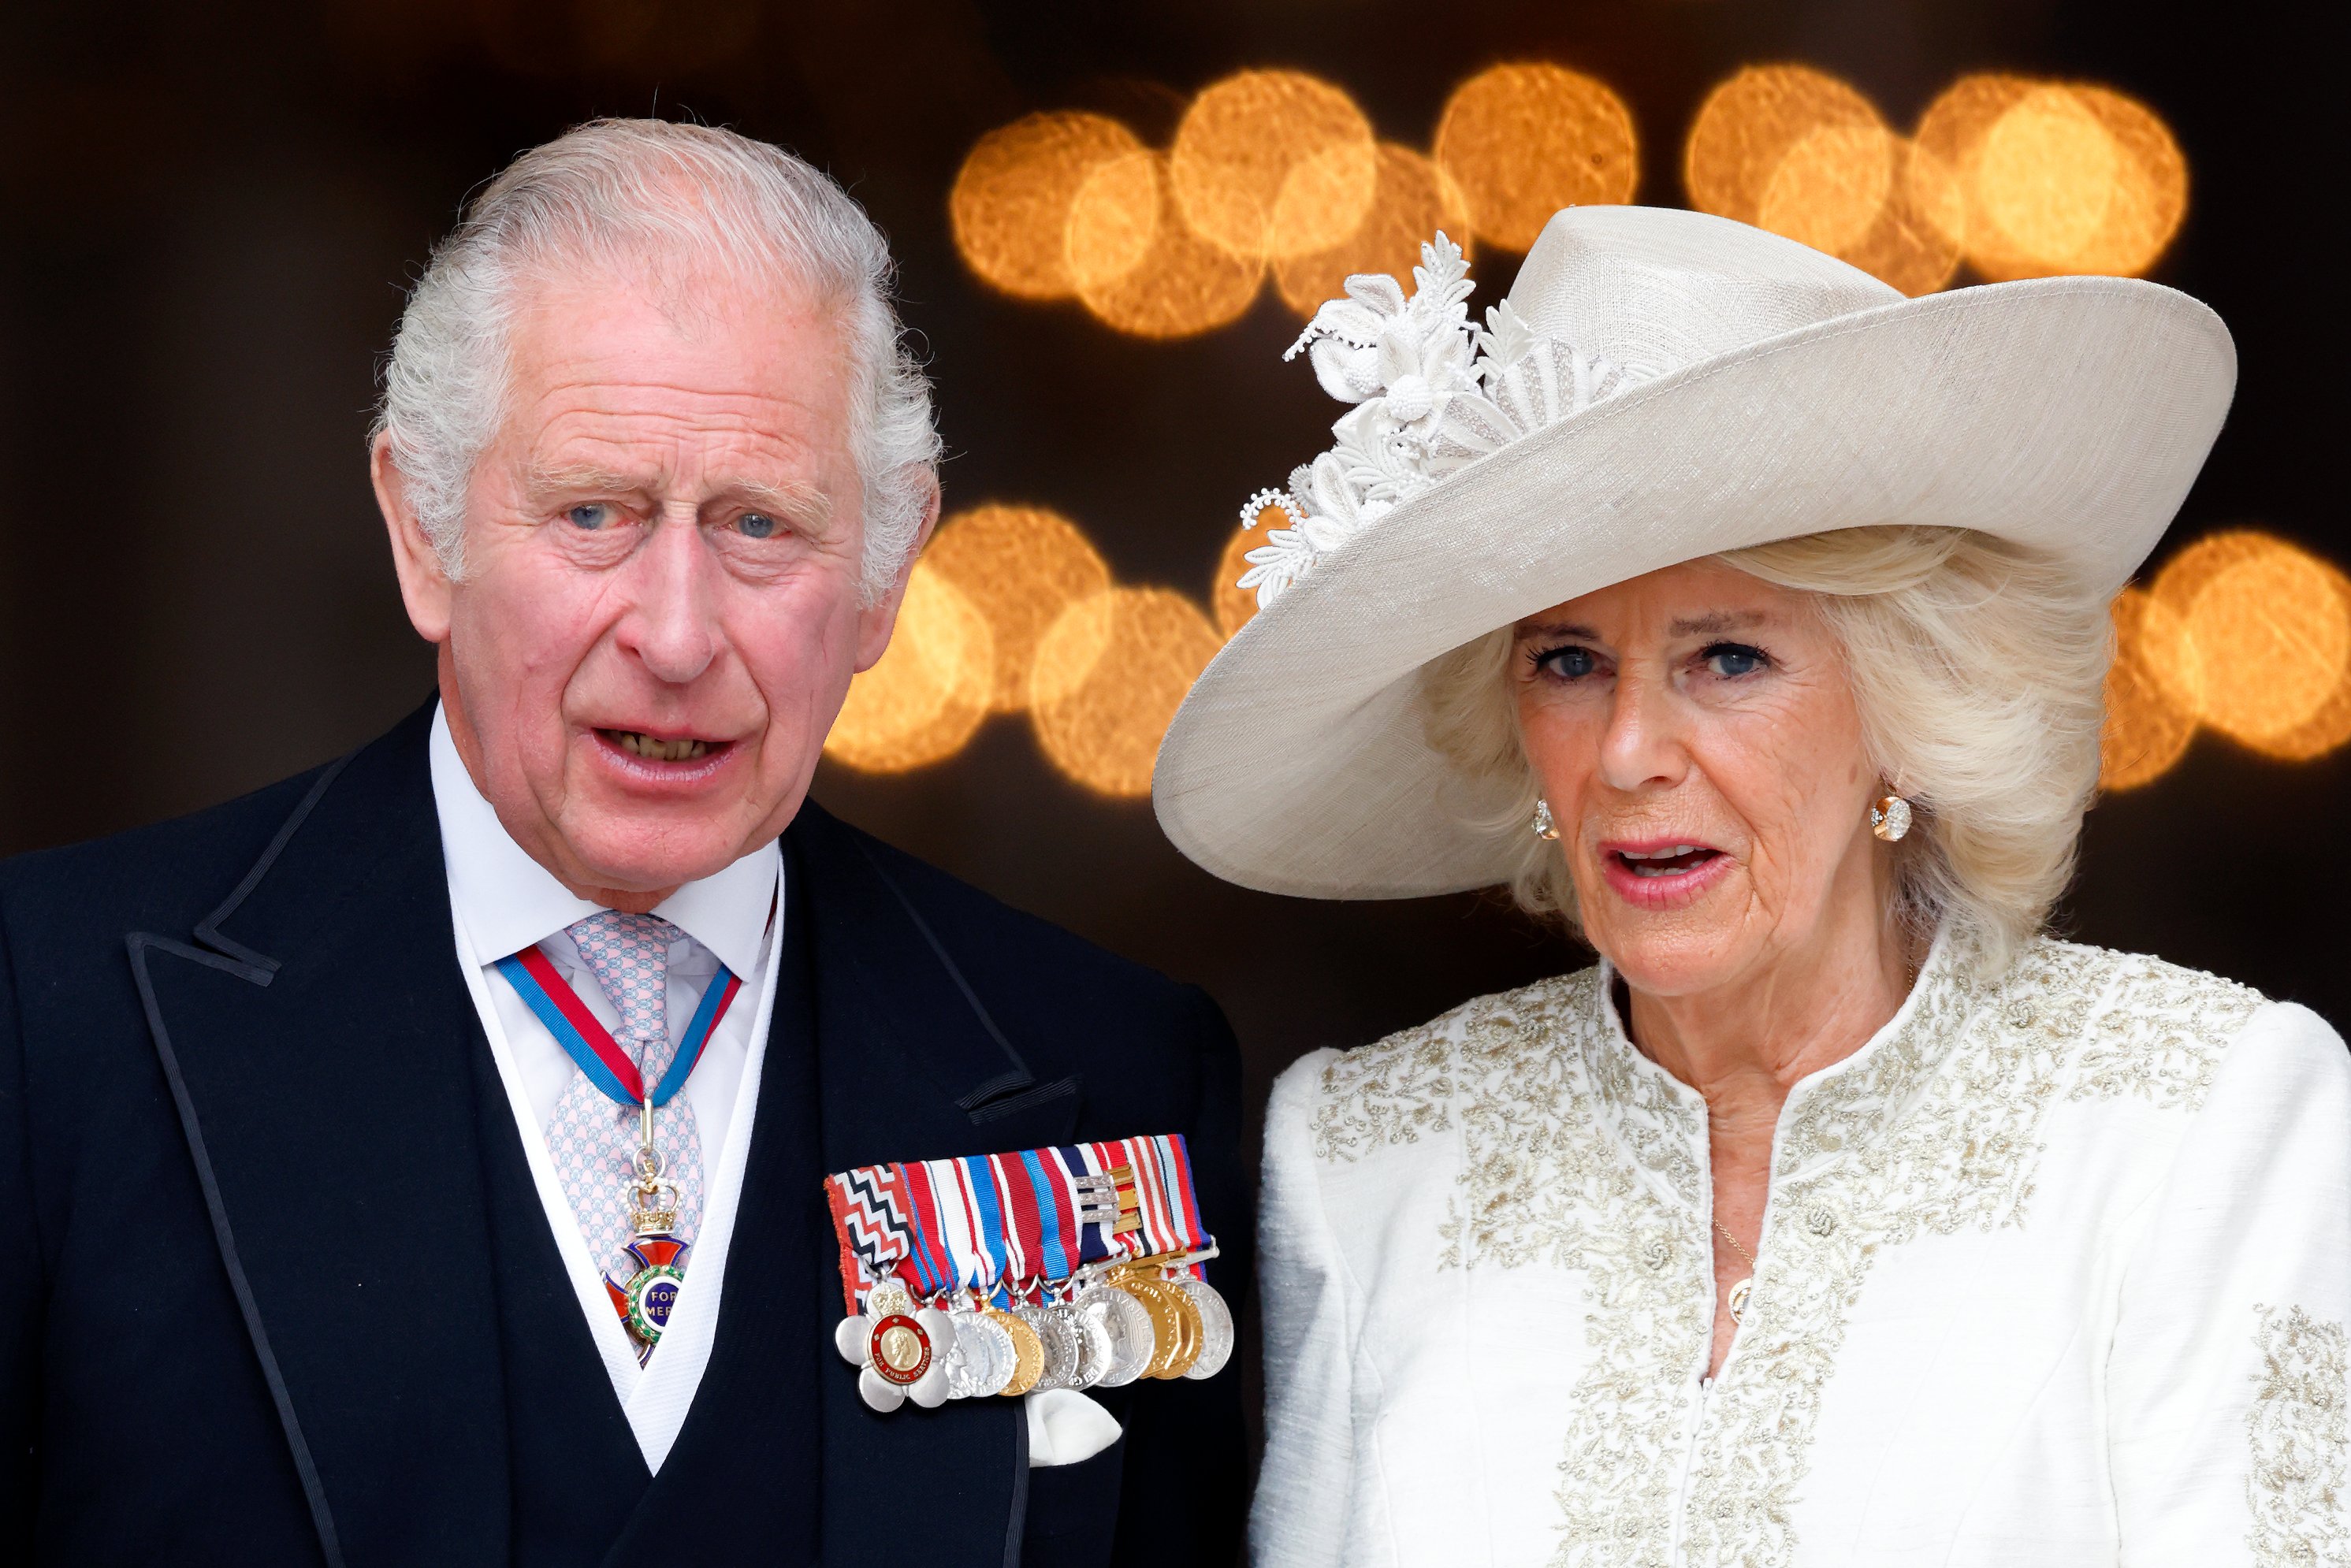  Prince Charles, Prince of Wales and Camilla, Duchess of Cornwall attend a National Service of Thanksgiving to celebrate the Platinum Jubilee of Queen Elizabeth II at St Paul's Cathedral on June 3, 2022 in London, England. | Source: Getty Images